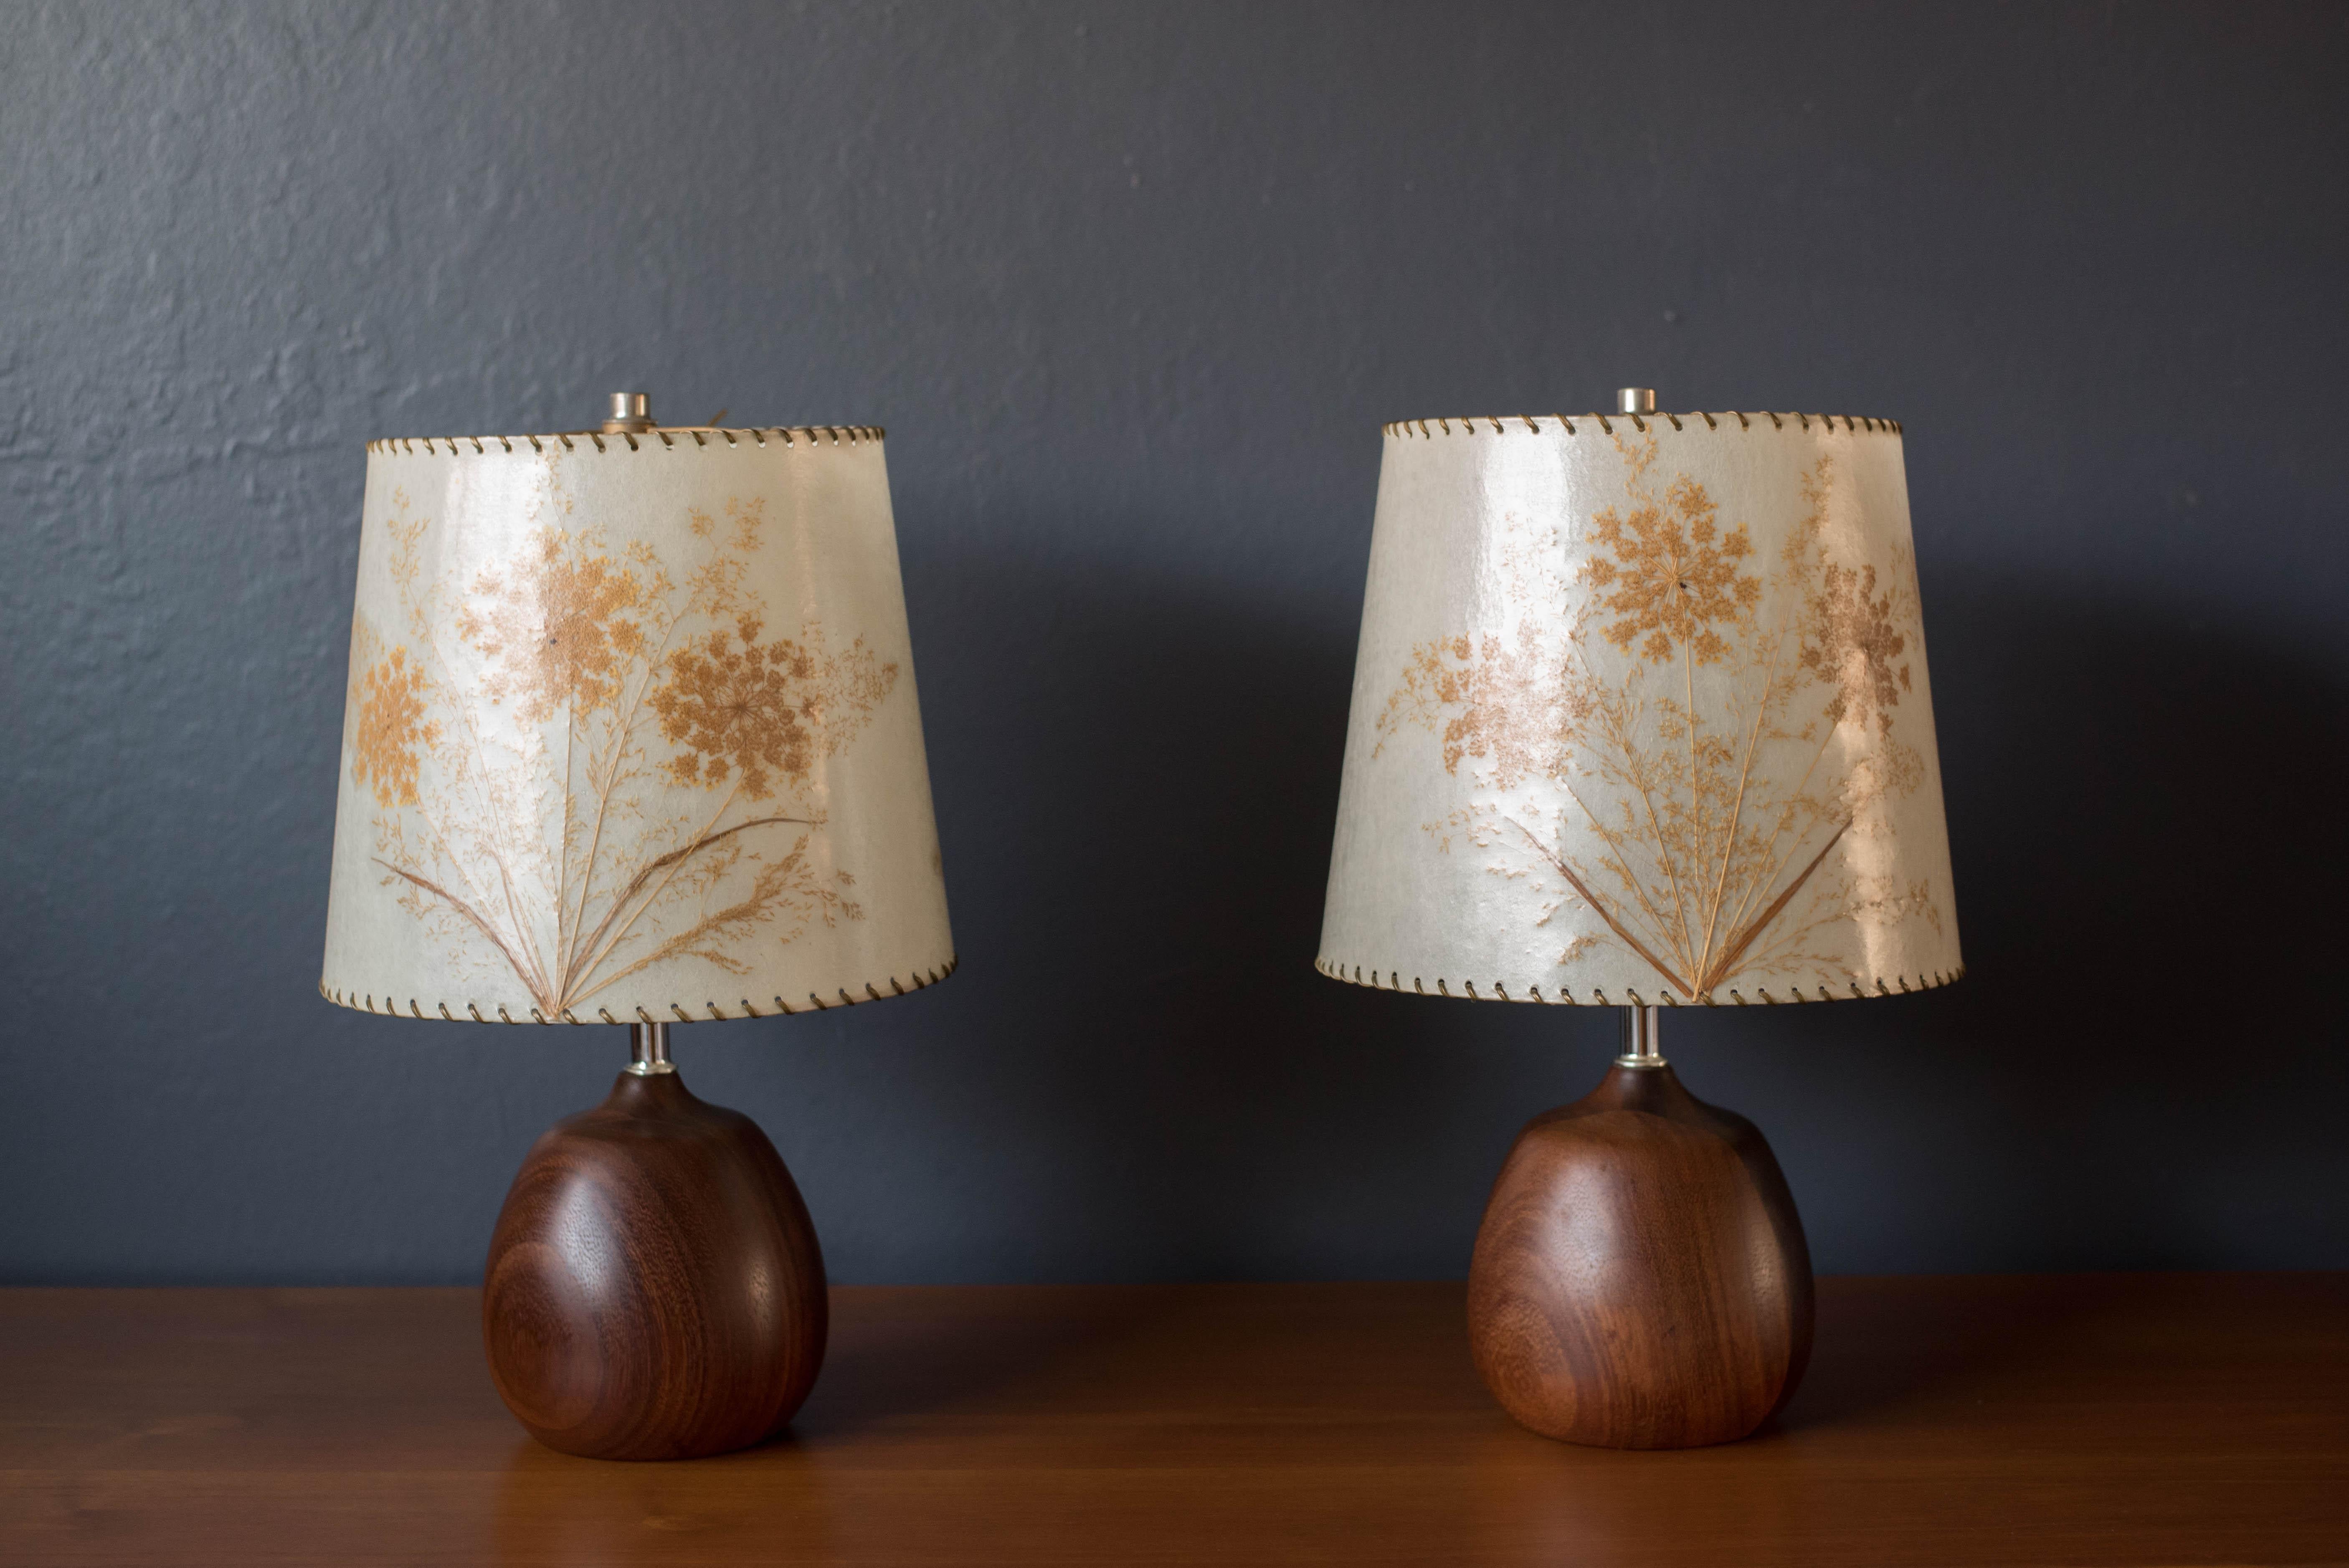 Vintage pair of Scandinavian Modern lamps circa 1960s. This unique set features a sculptural solid turned base in old growth teak accented with chrome hardware. Equipped with 3-way switch lighting. Shades are not included. Price is for the pair.